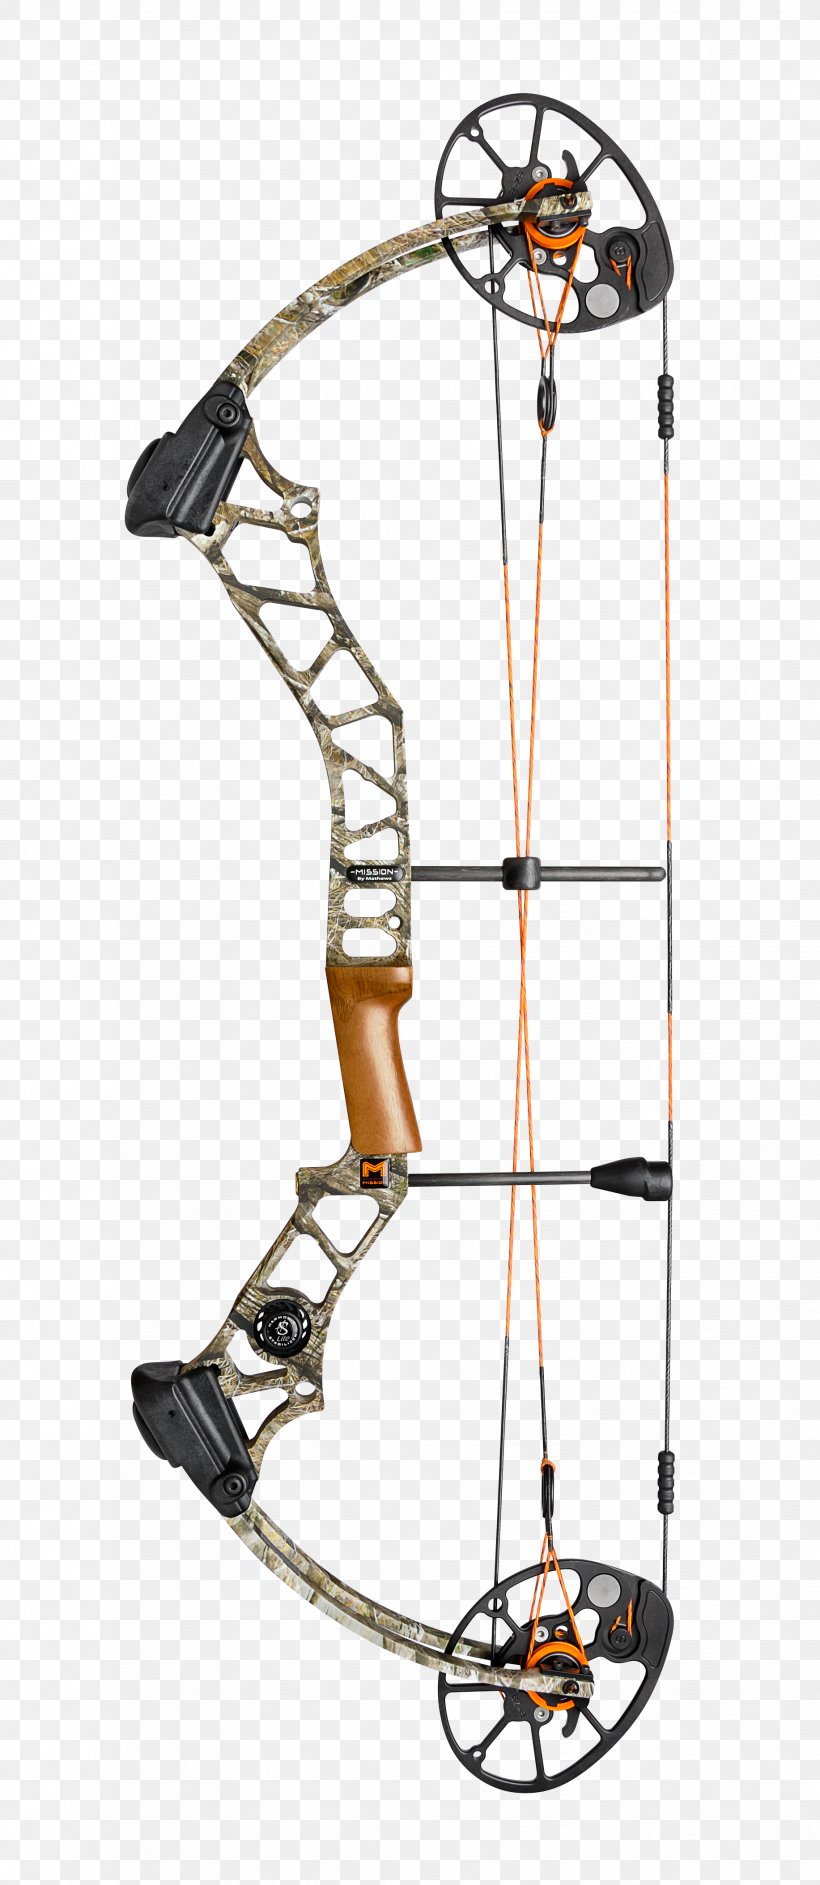 Bow And Arrow Hunting Compound Bows Ballistics Crossbow, PNG, 1833x4214px, Bow And Arrow, Archery, Ballistics, Bit, Bow Download Free